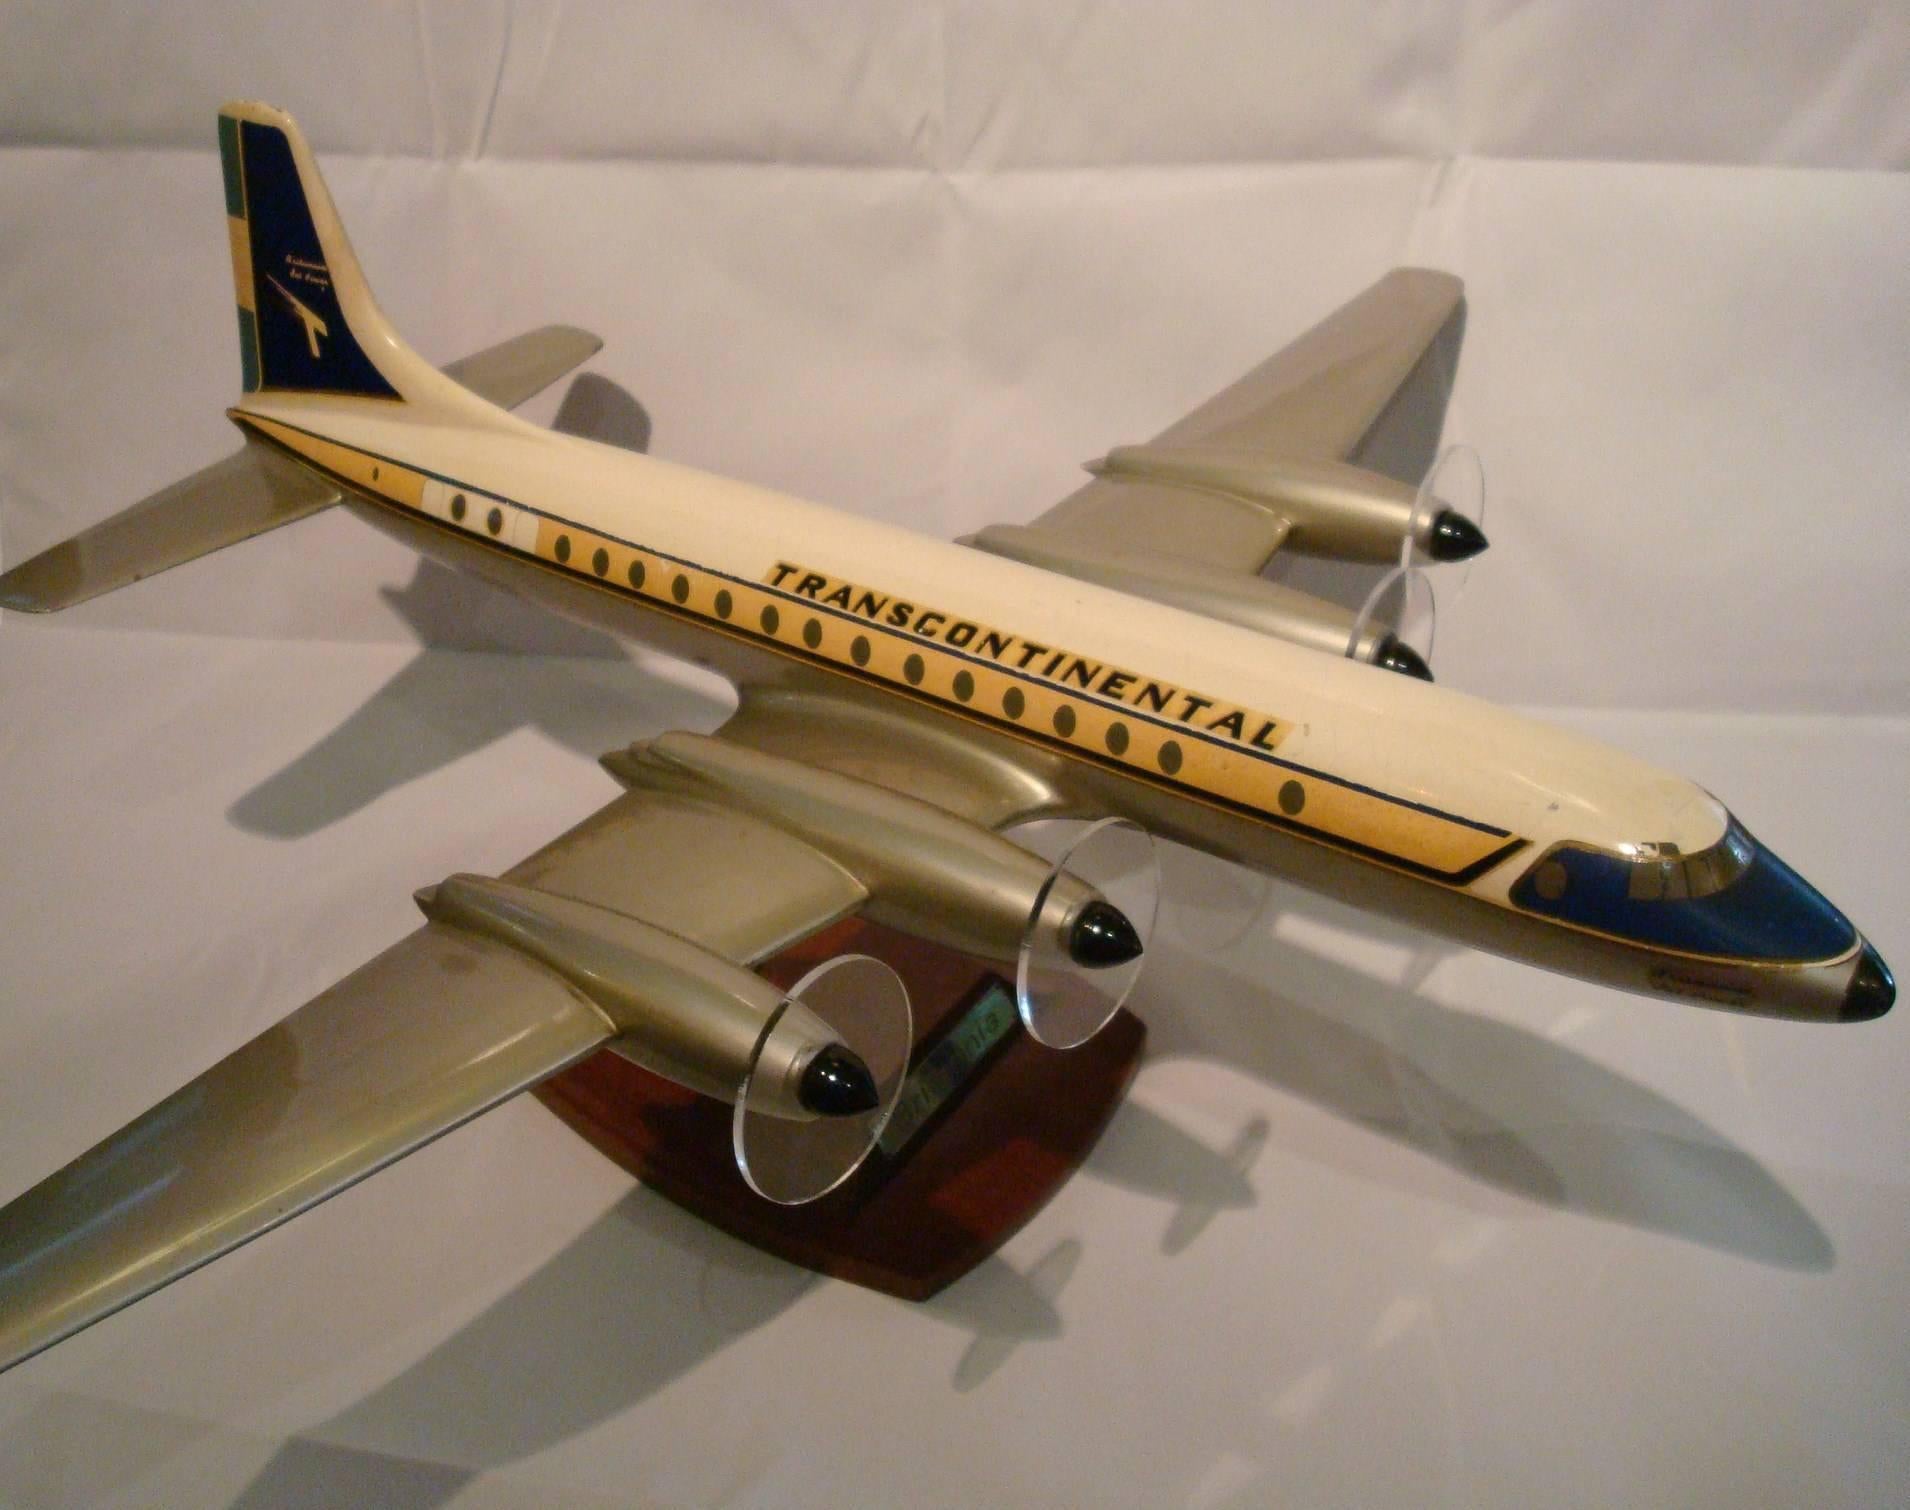 Very rare airplane advertising model, the company worked only a couple of years, from 1959 to 1961, they did International flights from Argentina and local trips. 
Model made by Mastermodels LTD. It has a stamp under the airplane.
This model was a